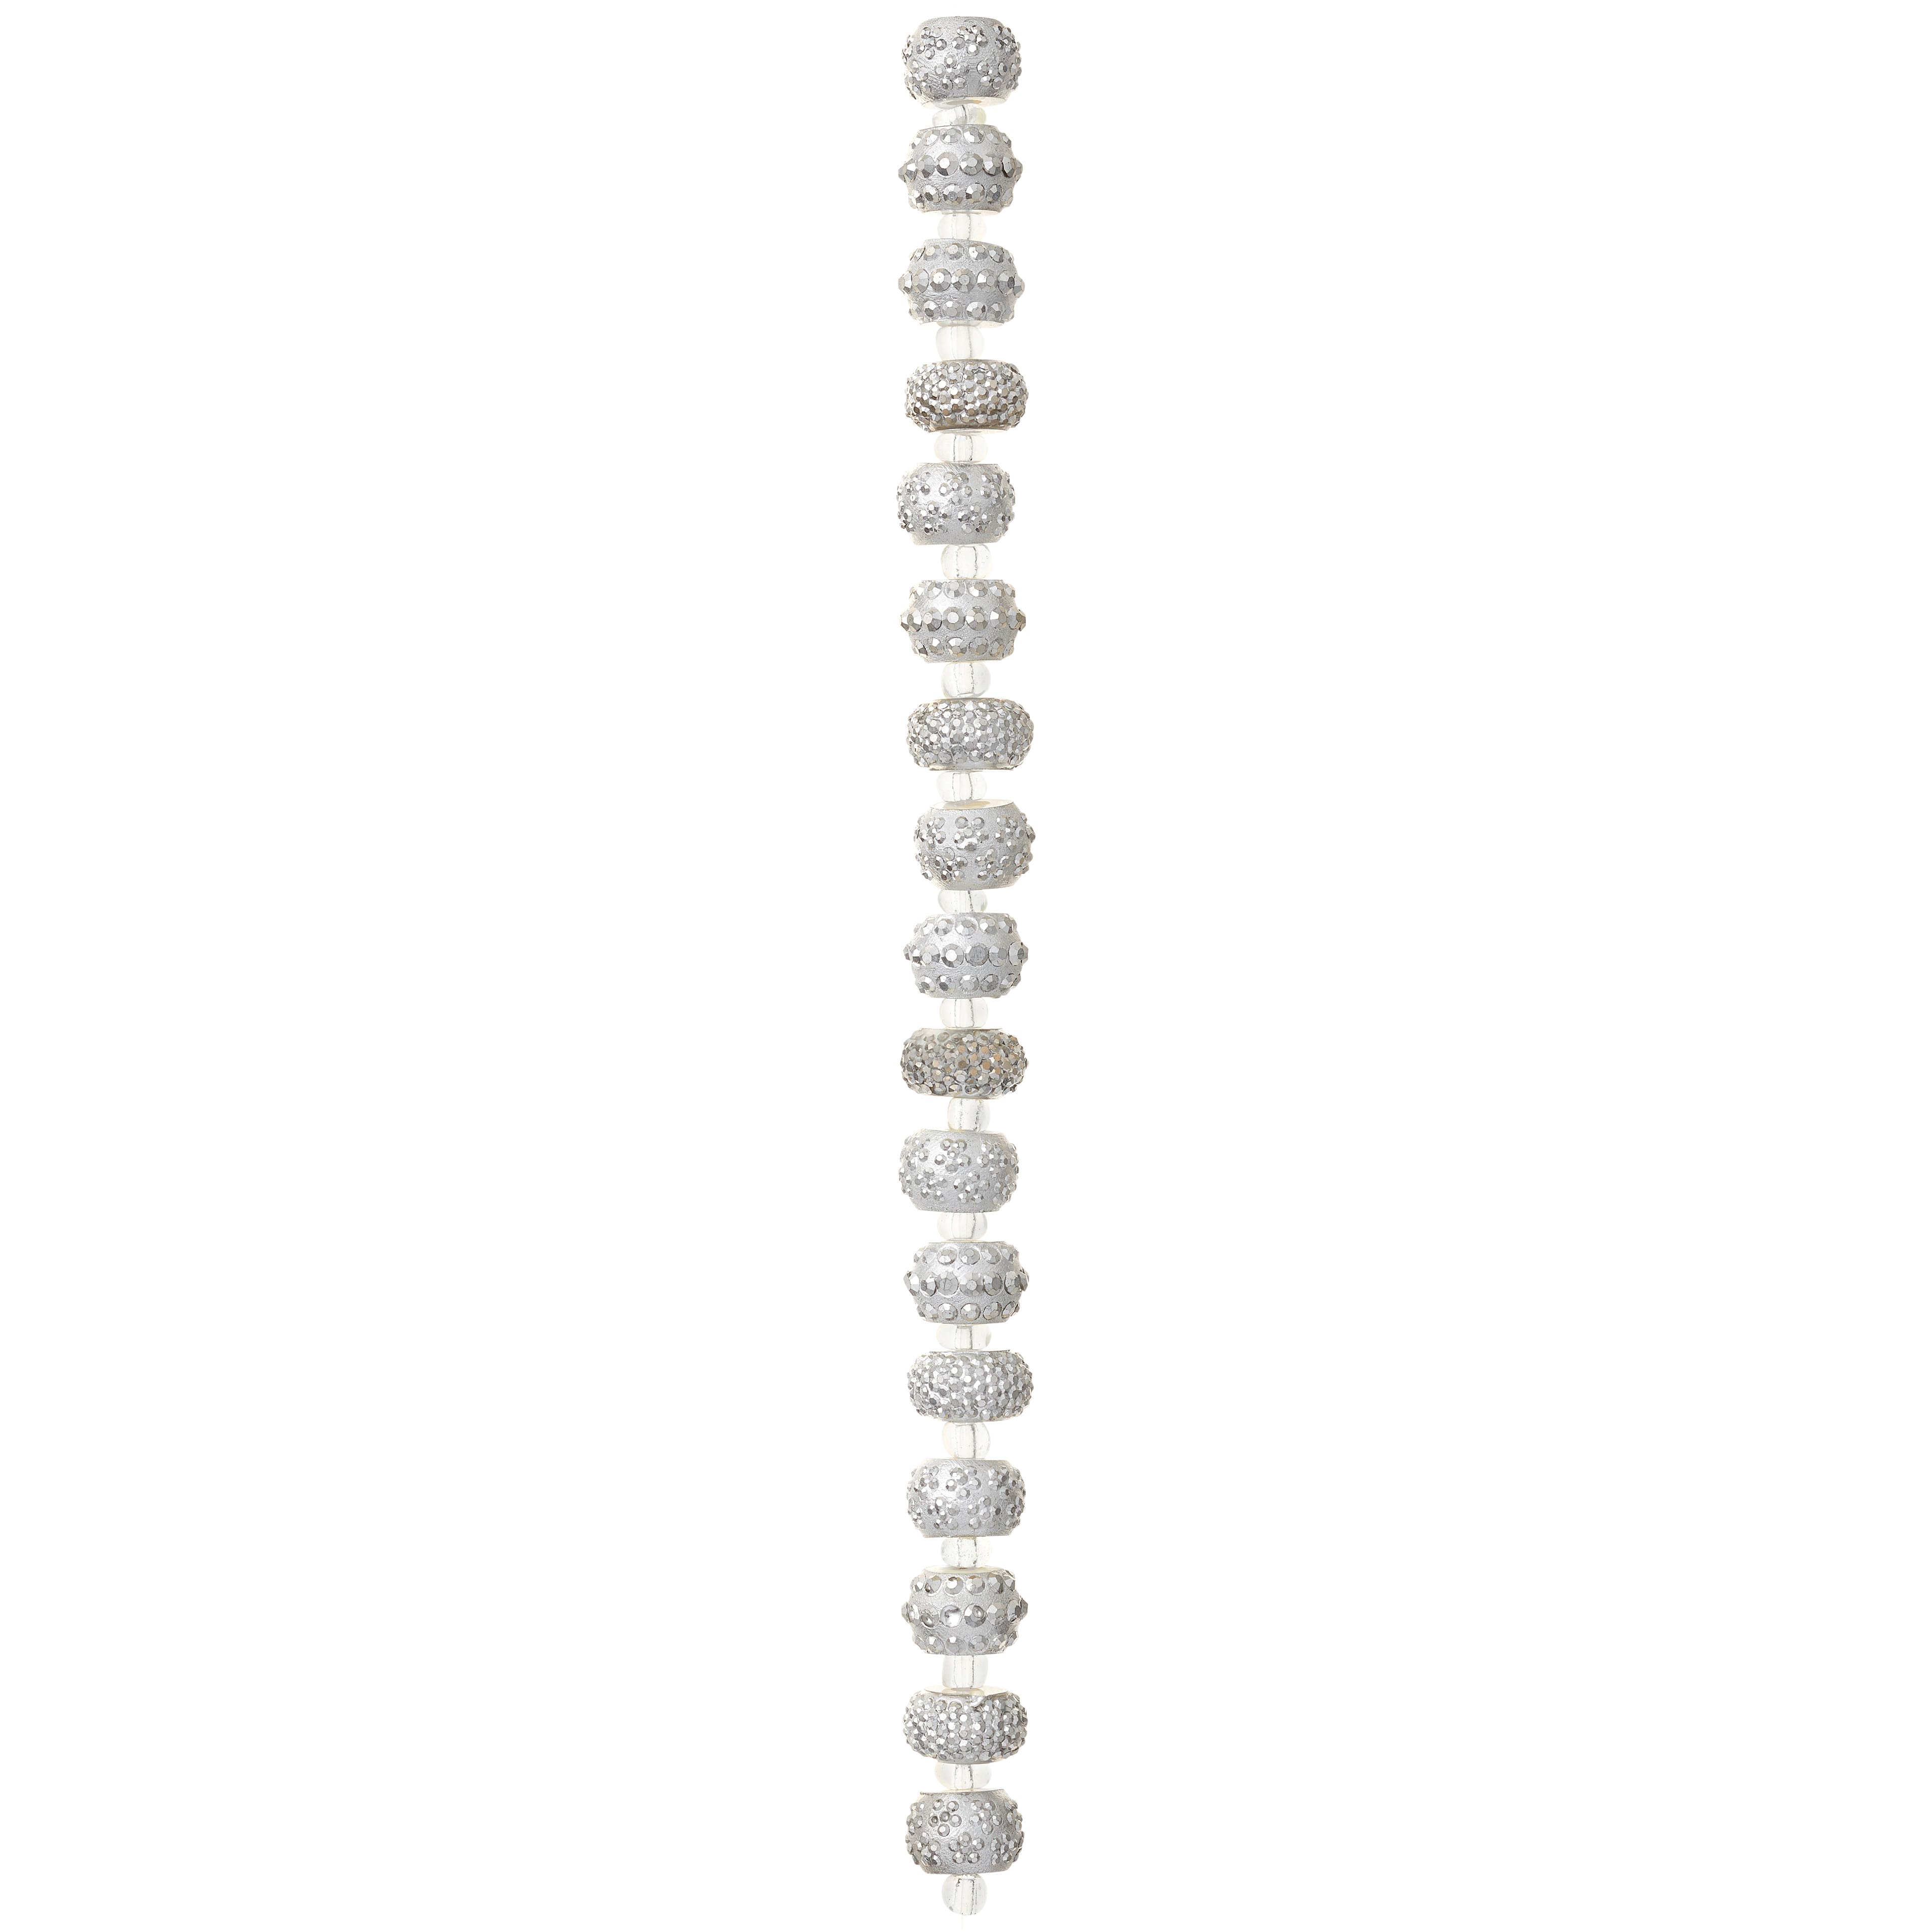 12 Packs: 18 ct. (216 total) Silver Acrylic Rondelle Beads, 10mm by Bead Landing&#x2122;